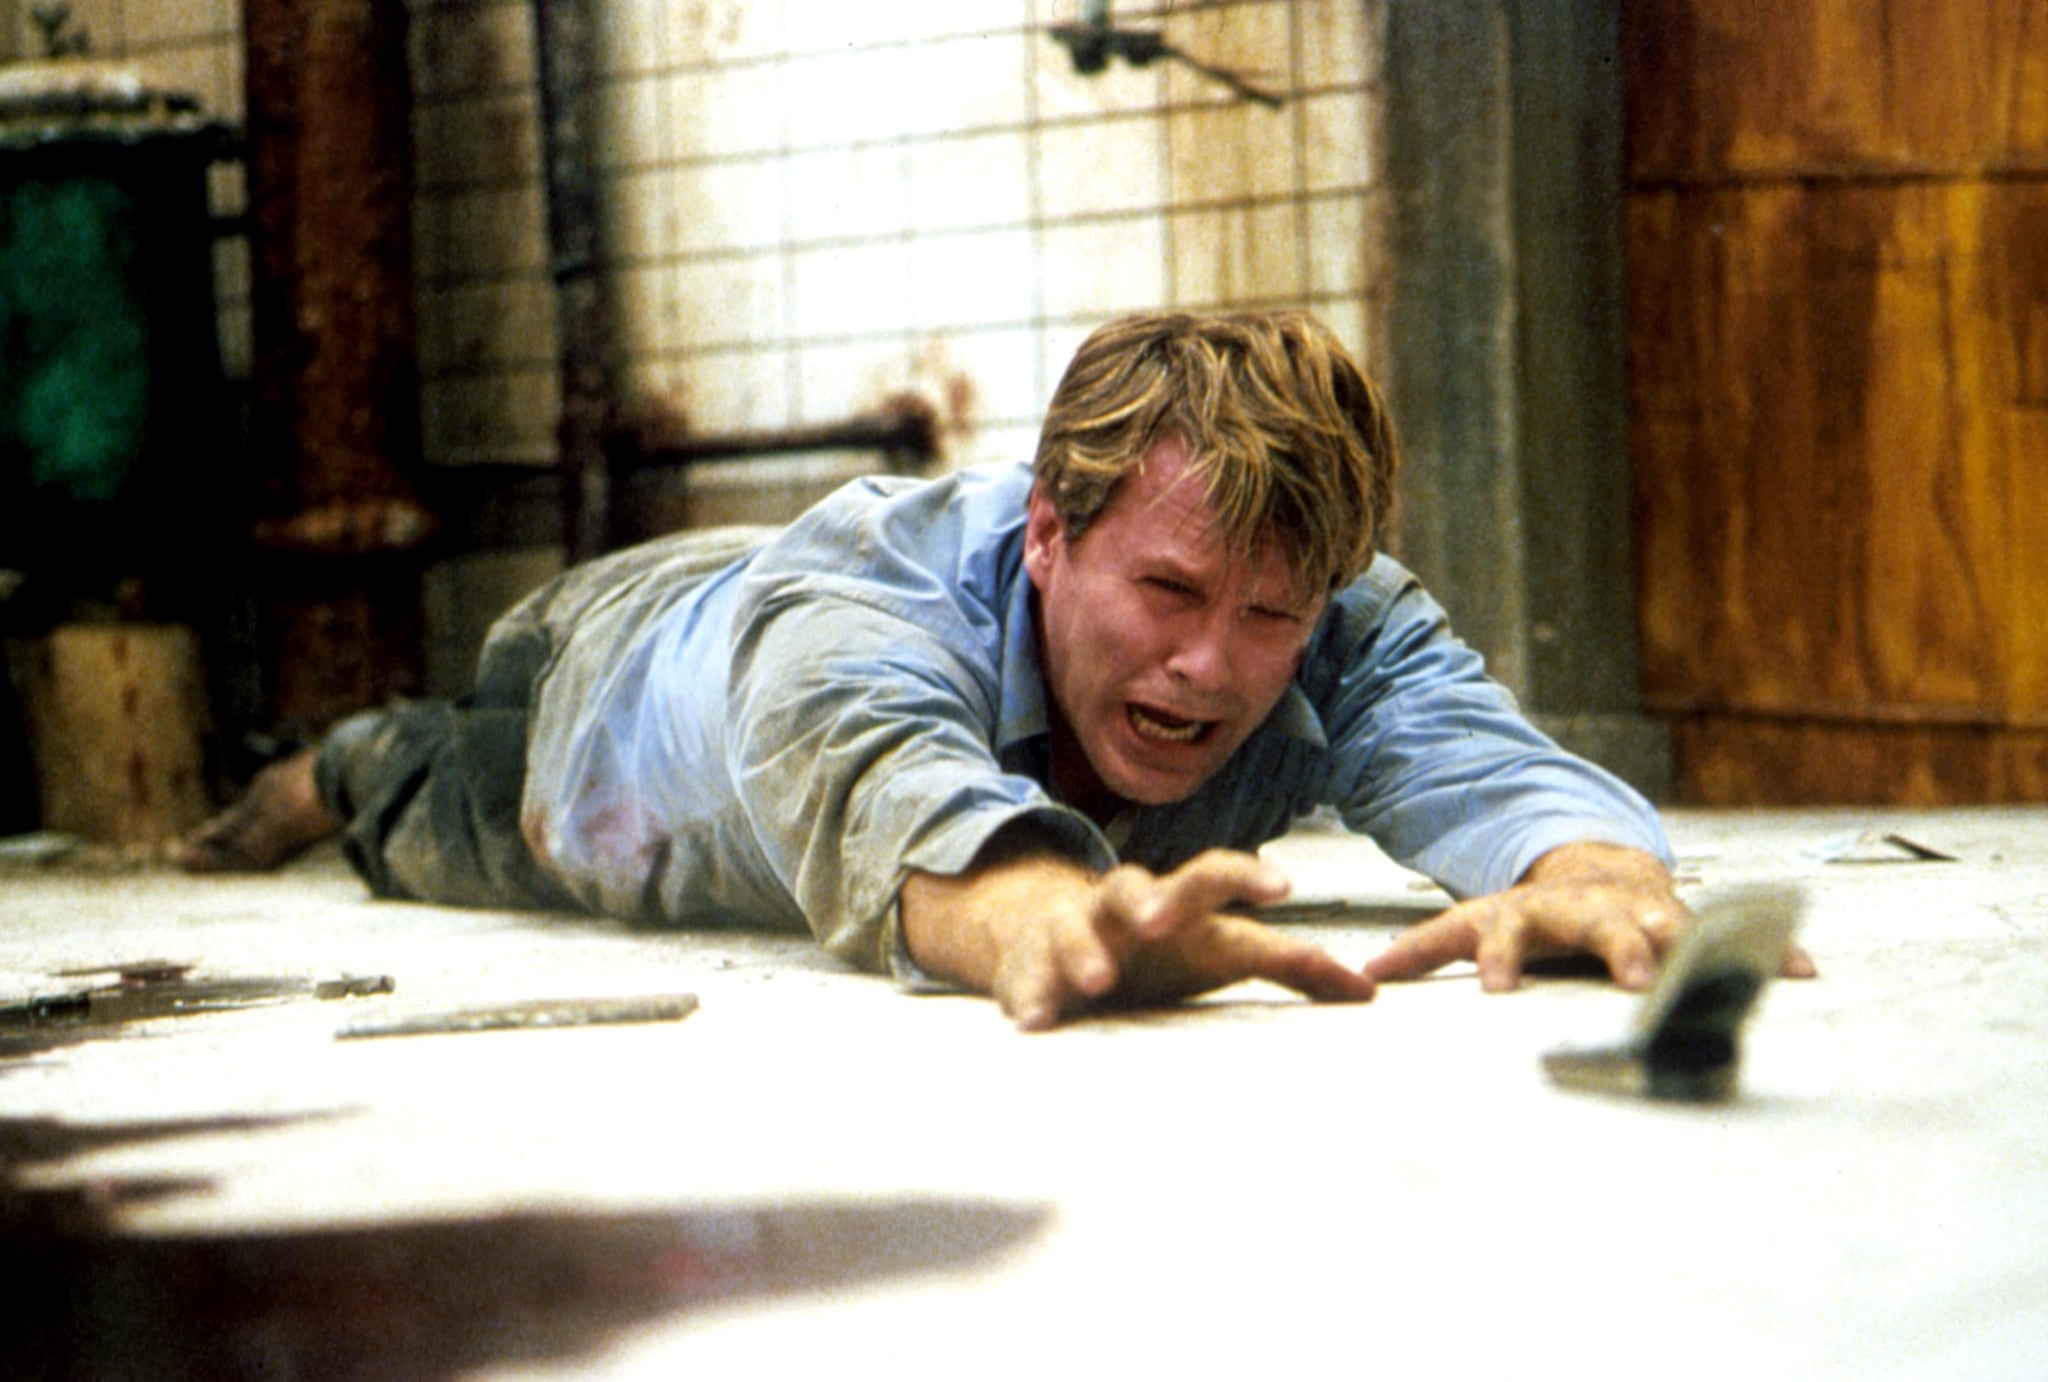 Cary Elwes weeps as he tries to reach a cell phone in the original 2004 Saw